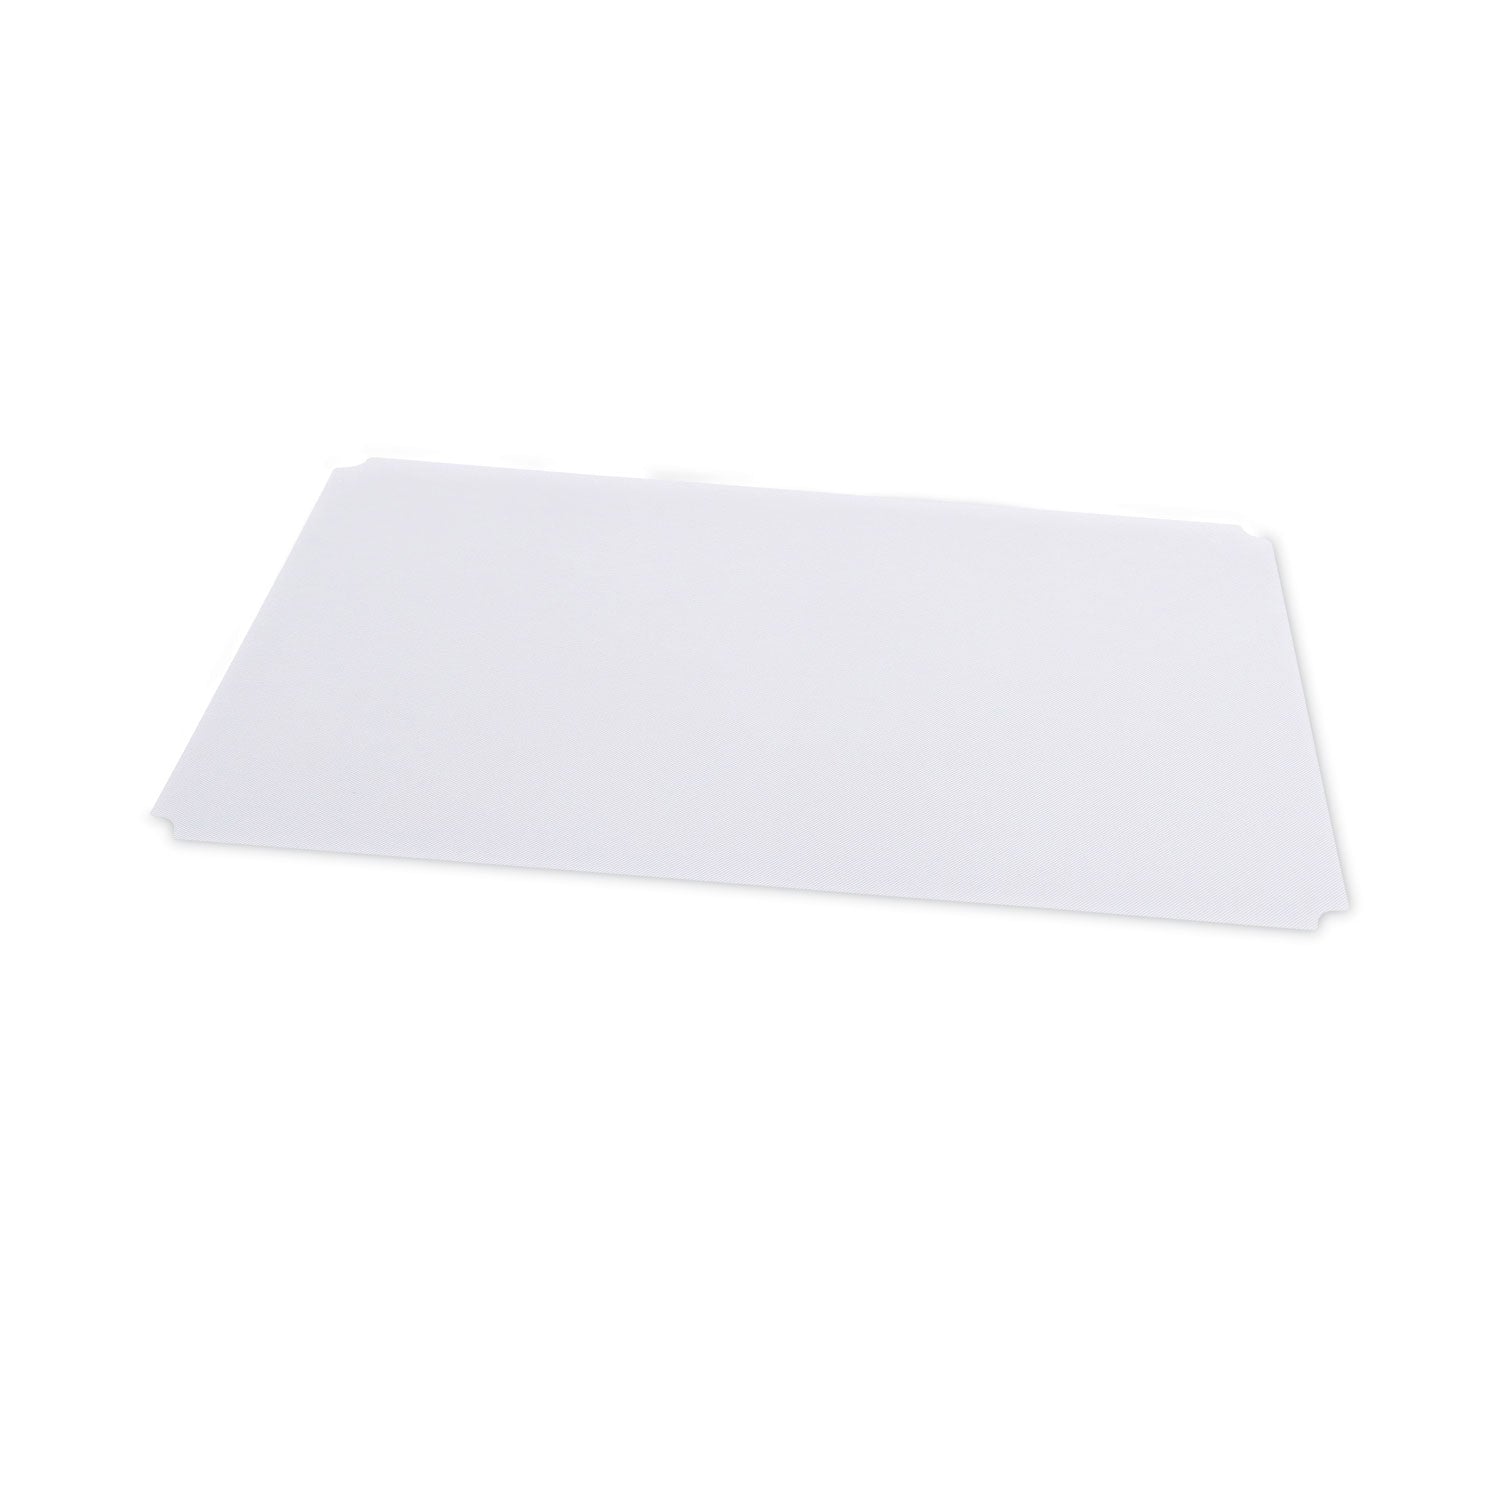 Shelf Liners For Wire Shelving, Clear Plastic, 36w x 24d, 4/Pack - 